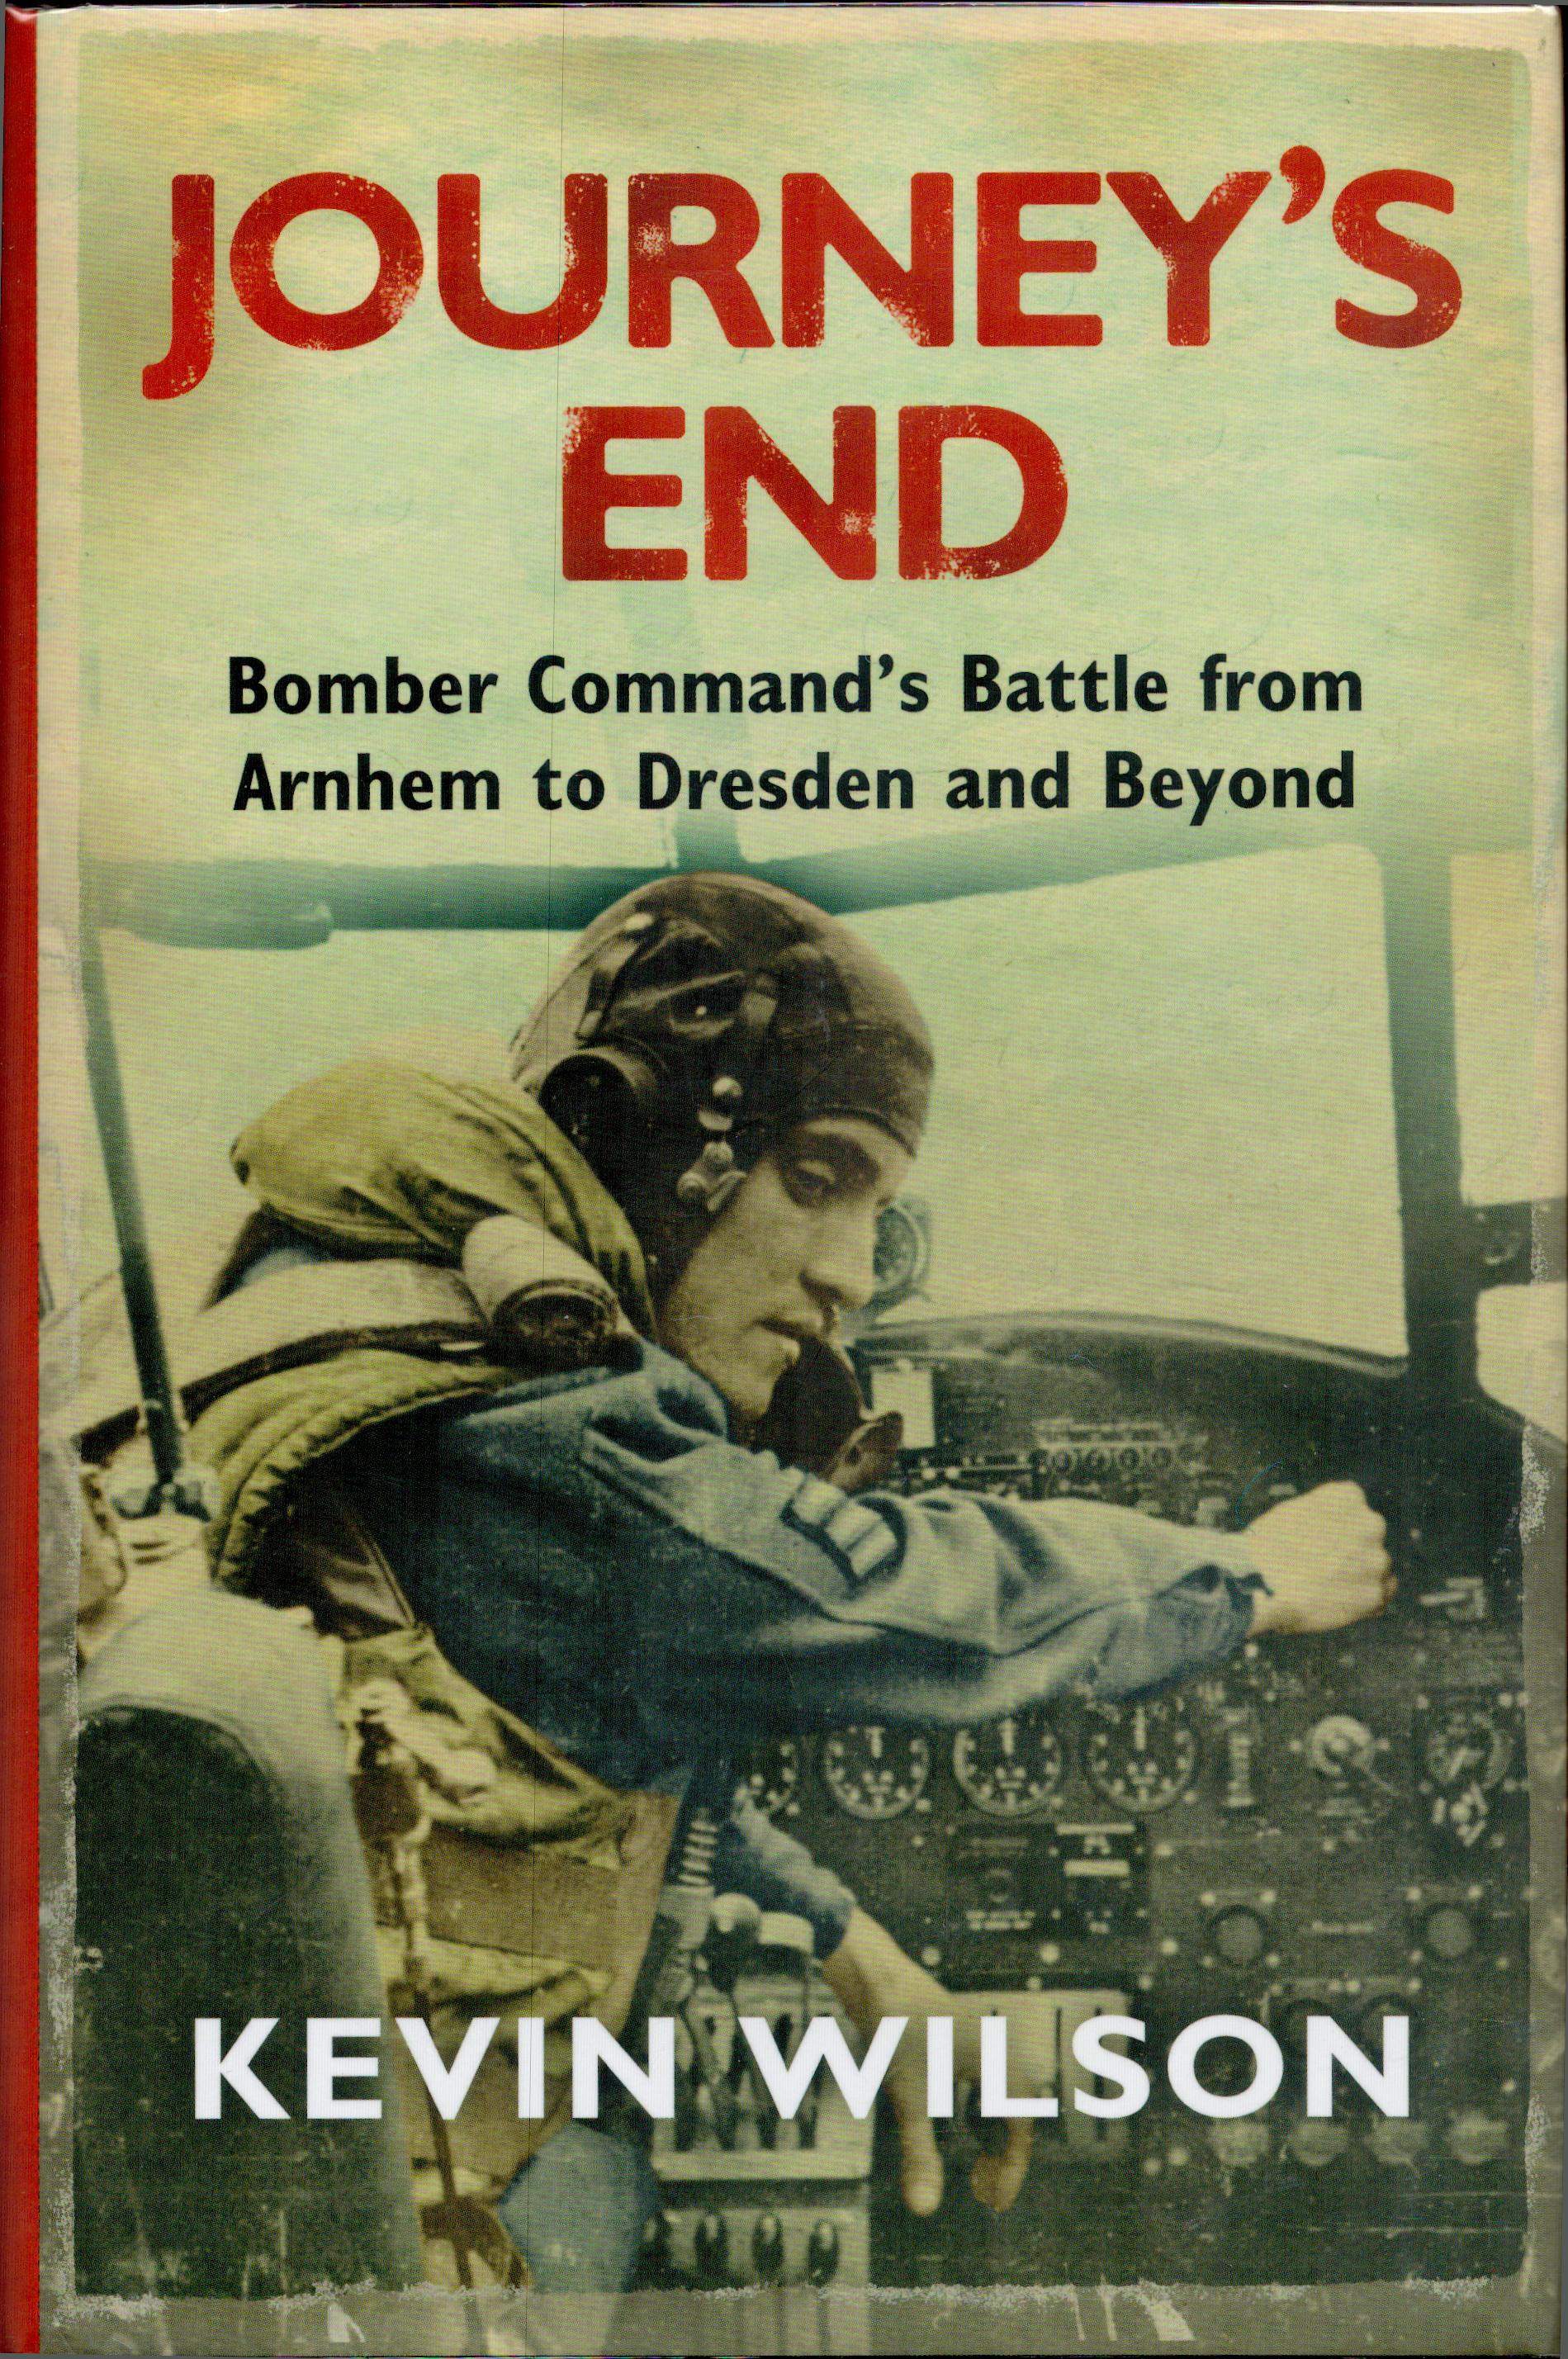 WWII multisigned hardback book titled Journeys End by the author Kevin Wilson includes 36 veteran